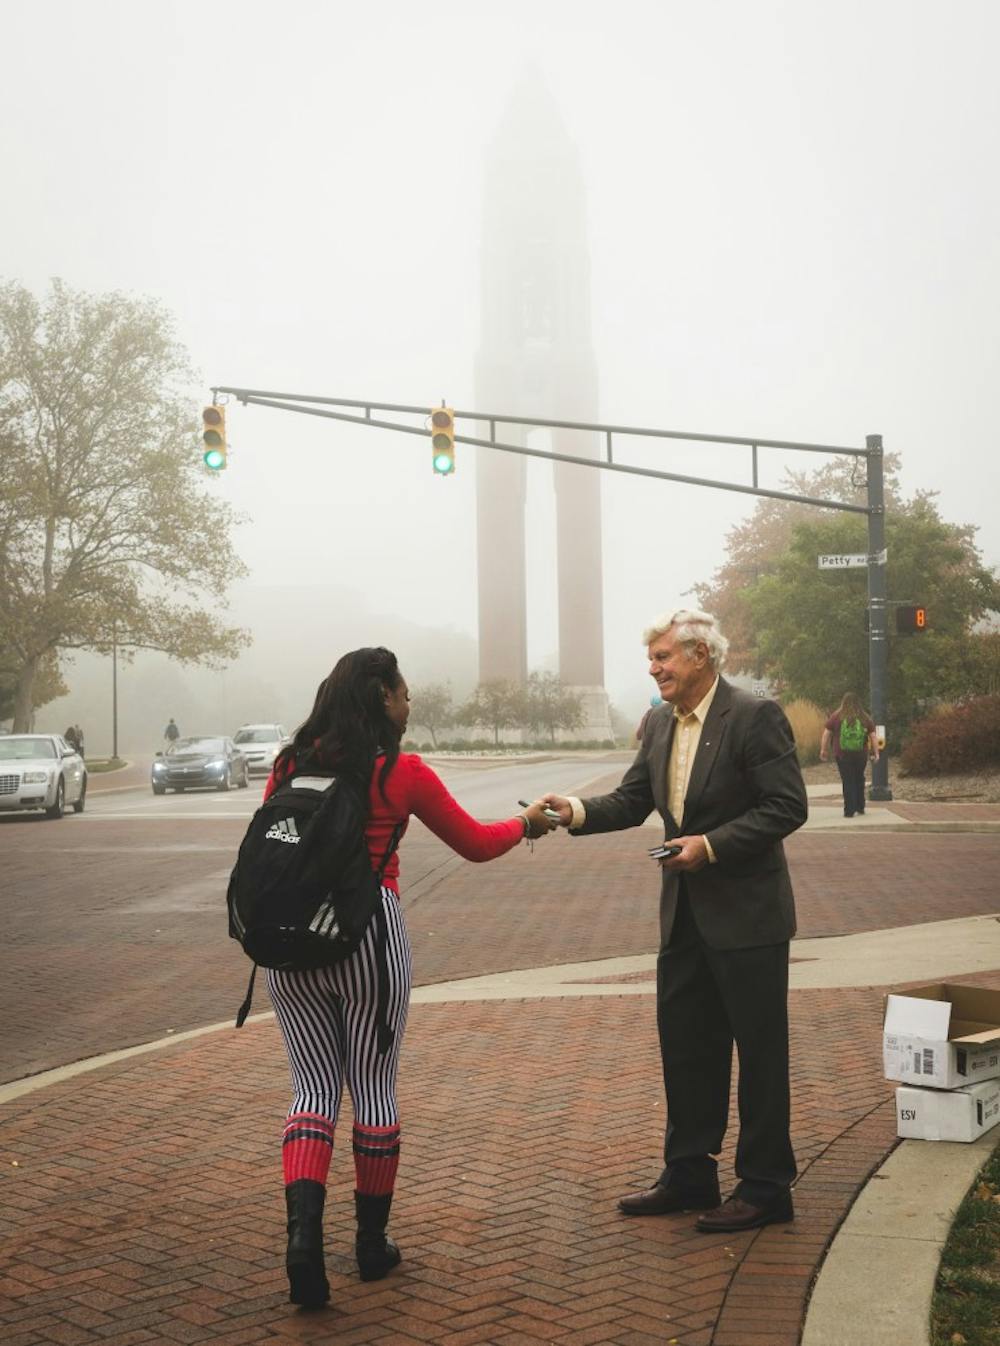 <p>The Gideons passed out Bibles to students all around campus on Oct. 7. The groups goal is to spread knowledge of Christianity and give away free Bibles to people. <em>DN PHOTO KELLEN HAZELIP</em></p>